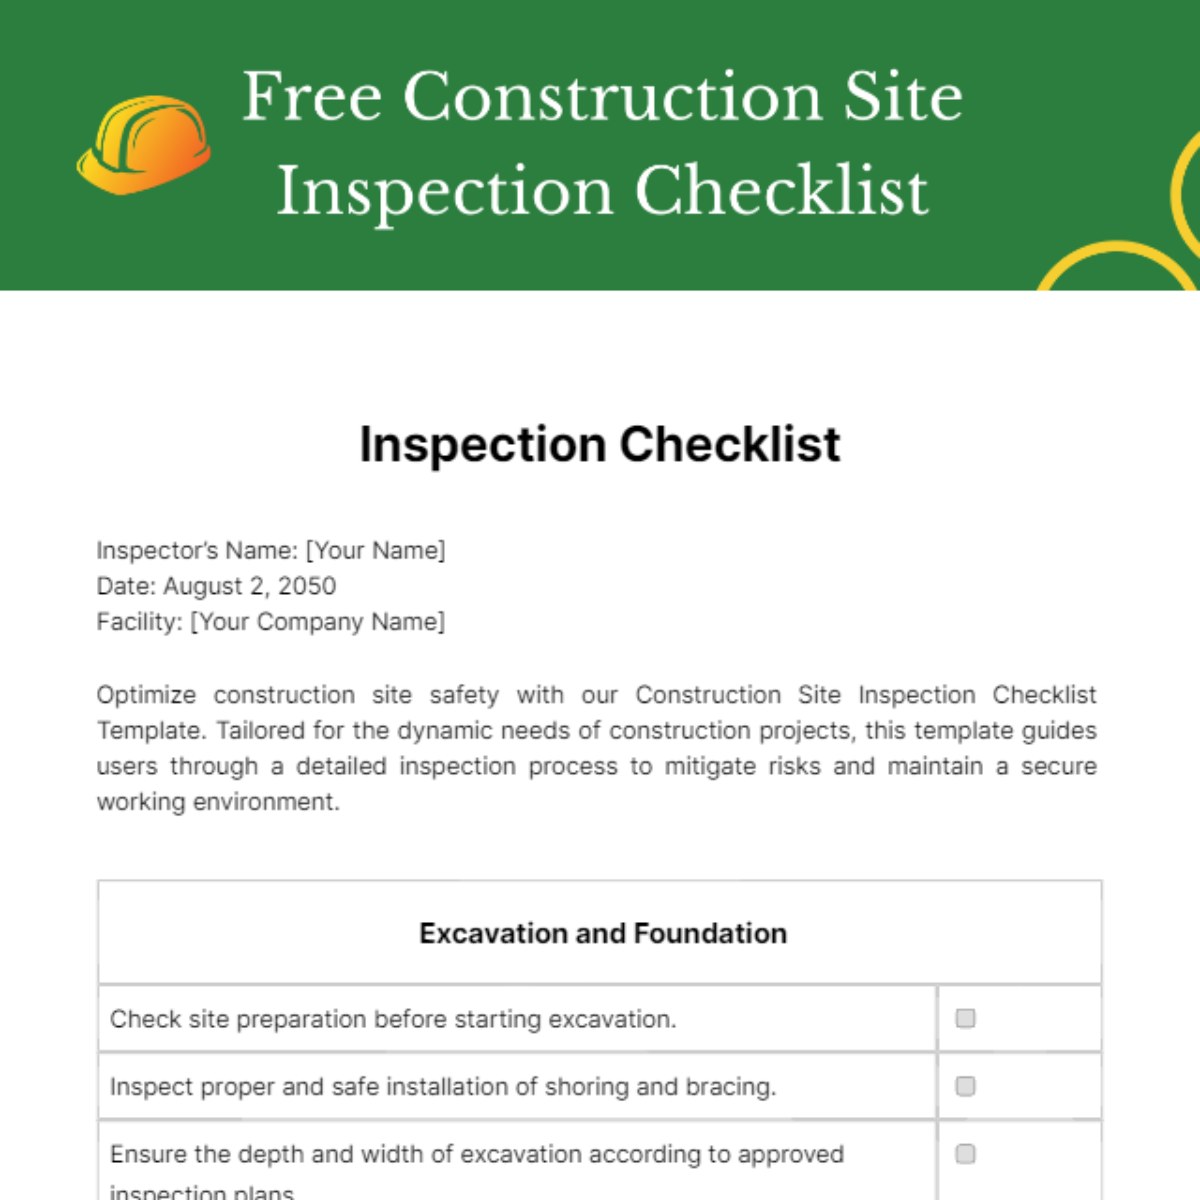 Free Construction Site Inspection Checklist Template